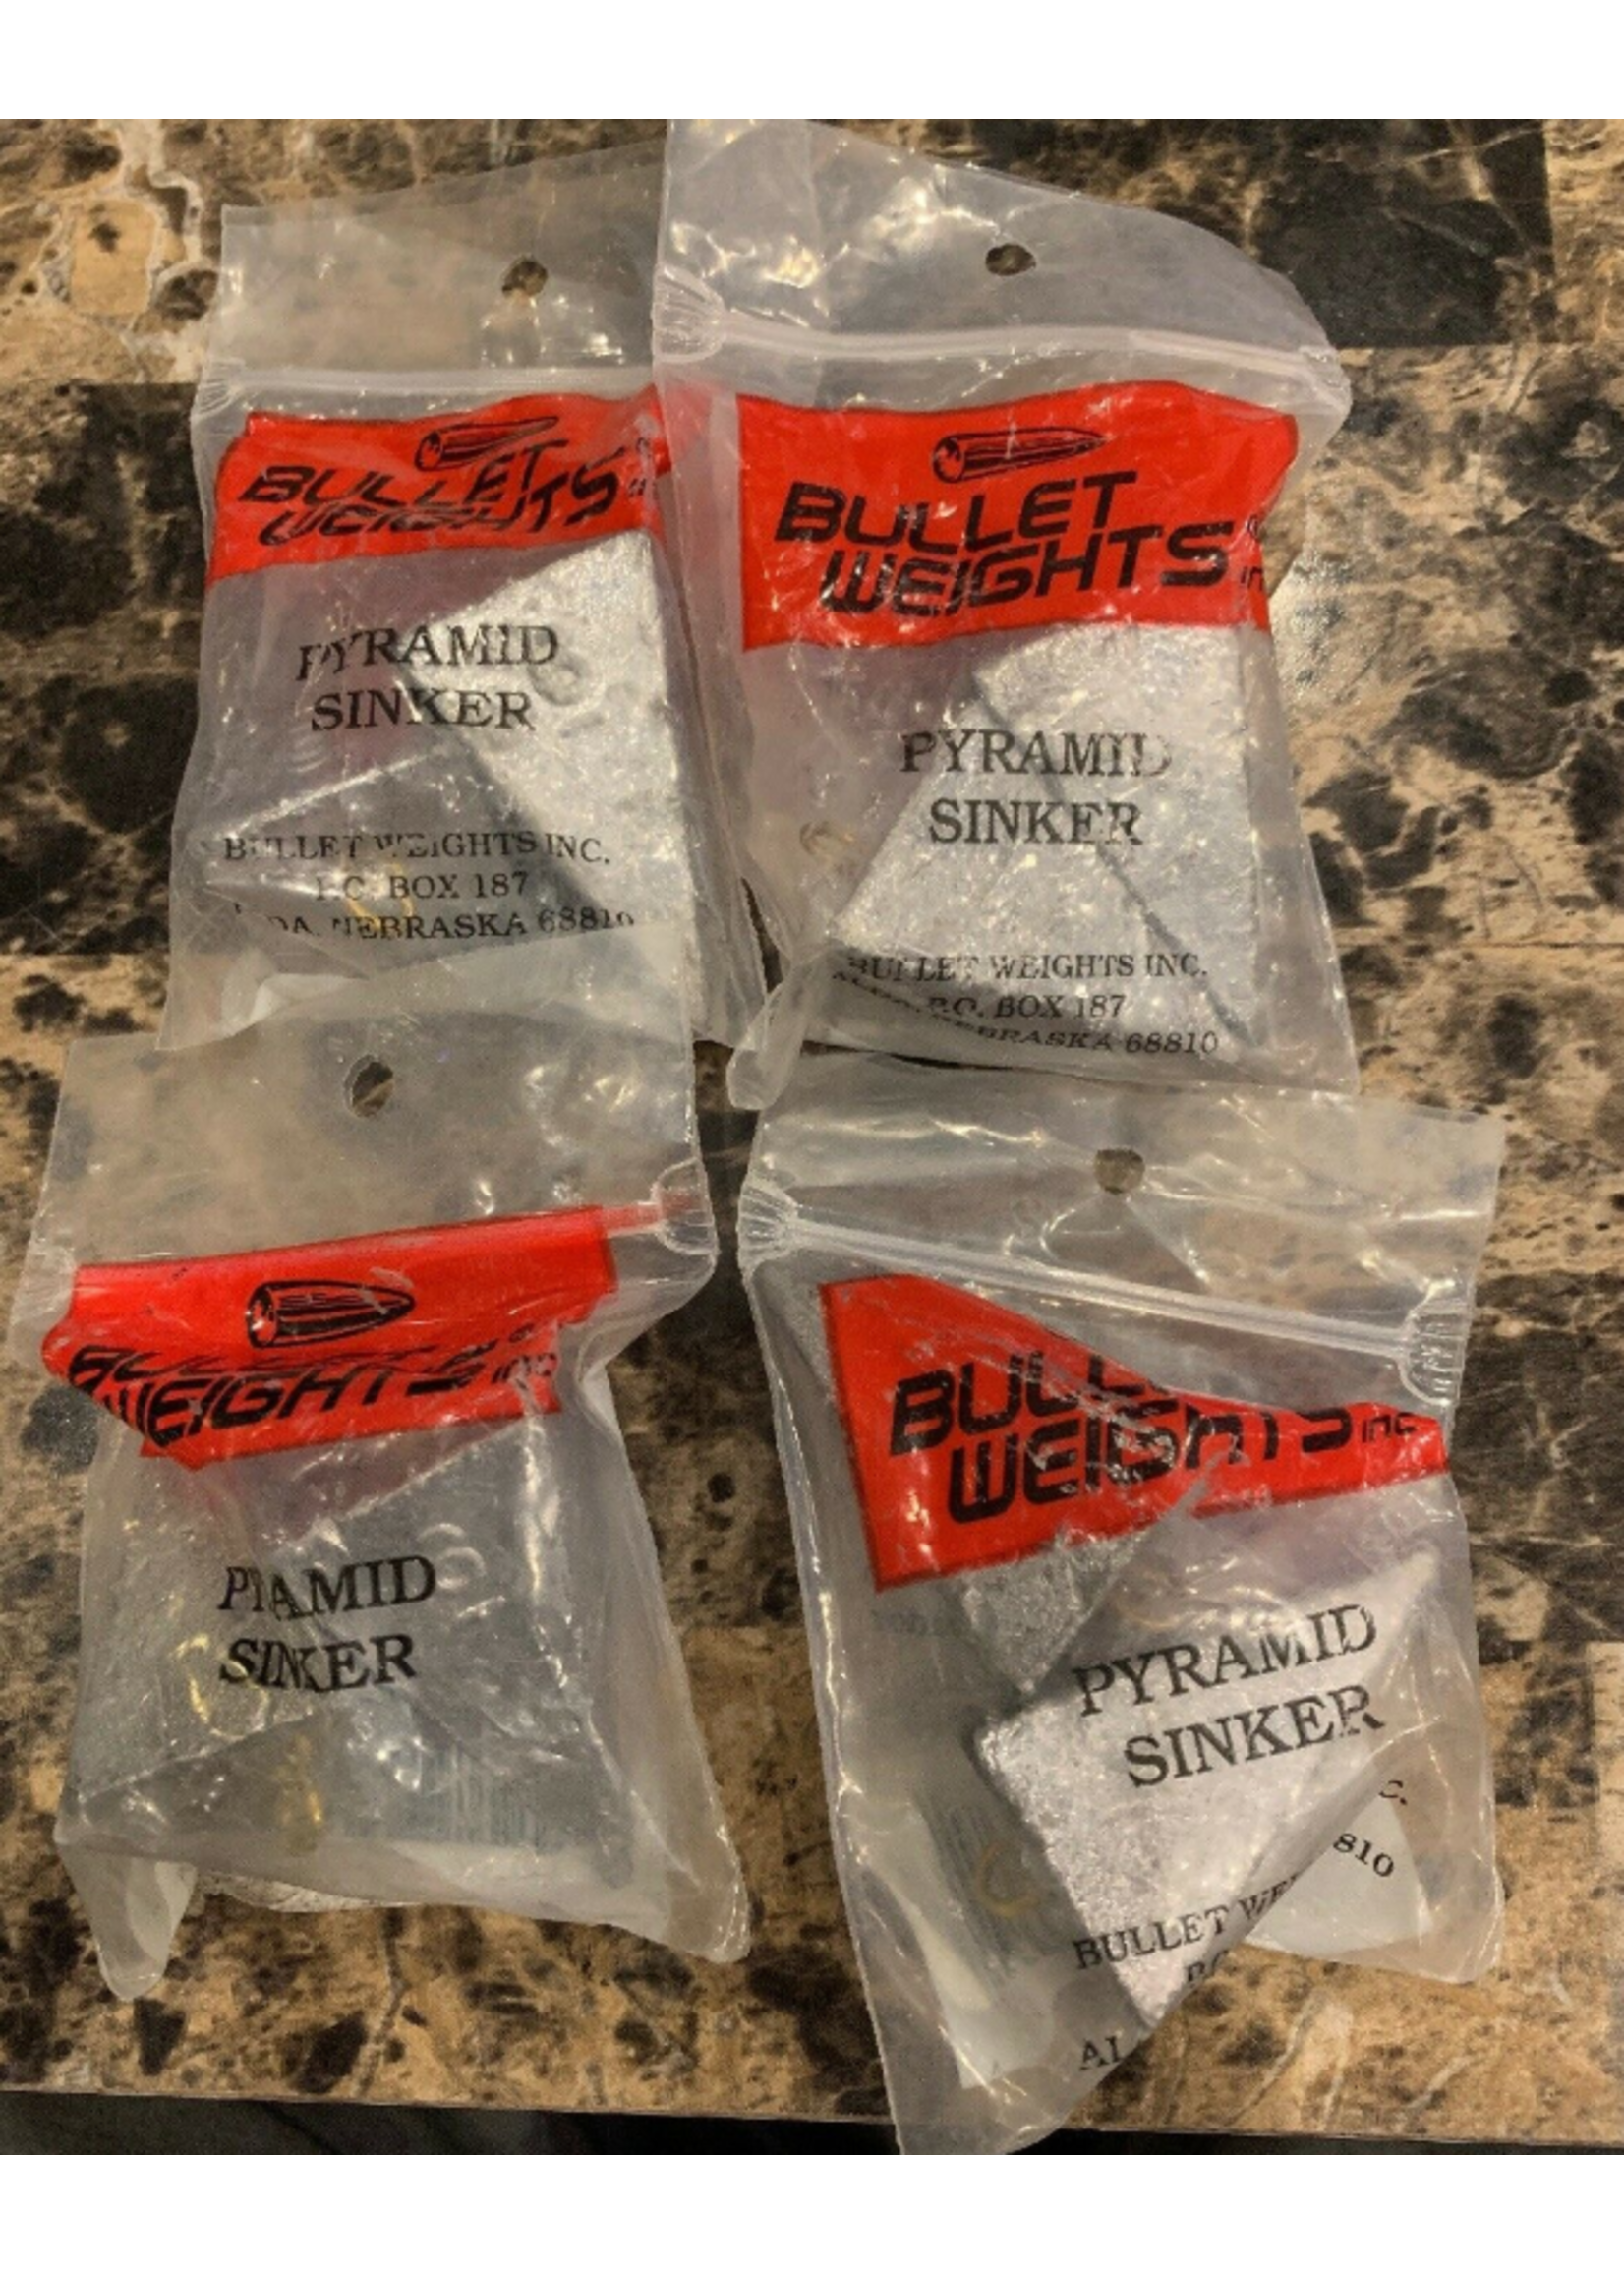 Bullet Weights Bullet Weights PY600-13 Pyramid Sinker 6oz 2 Pack